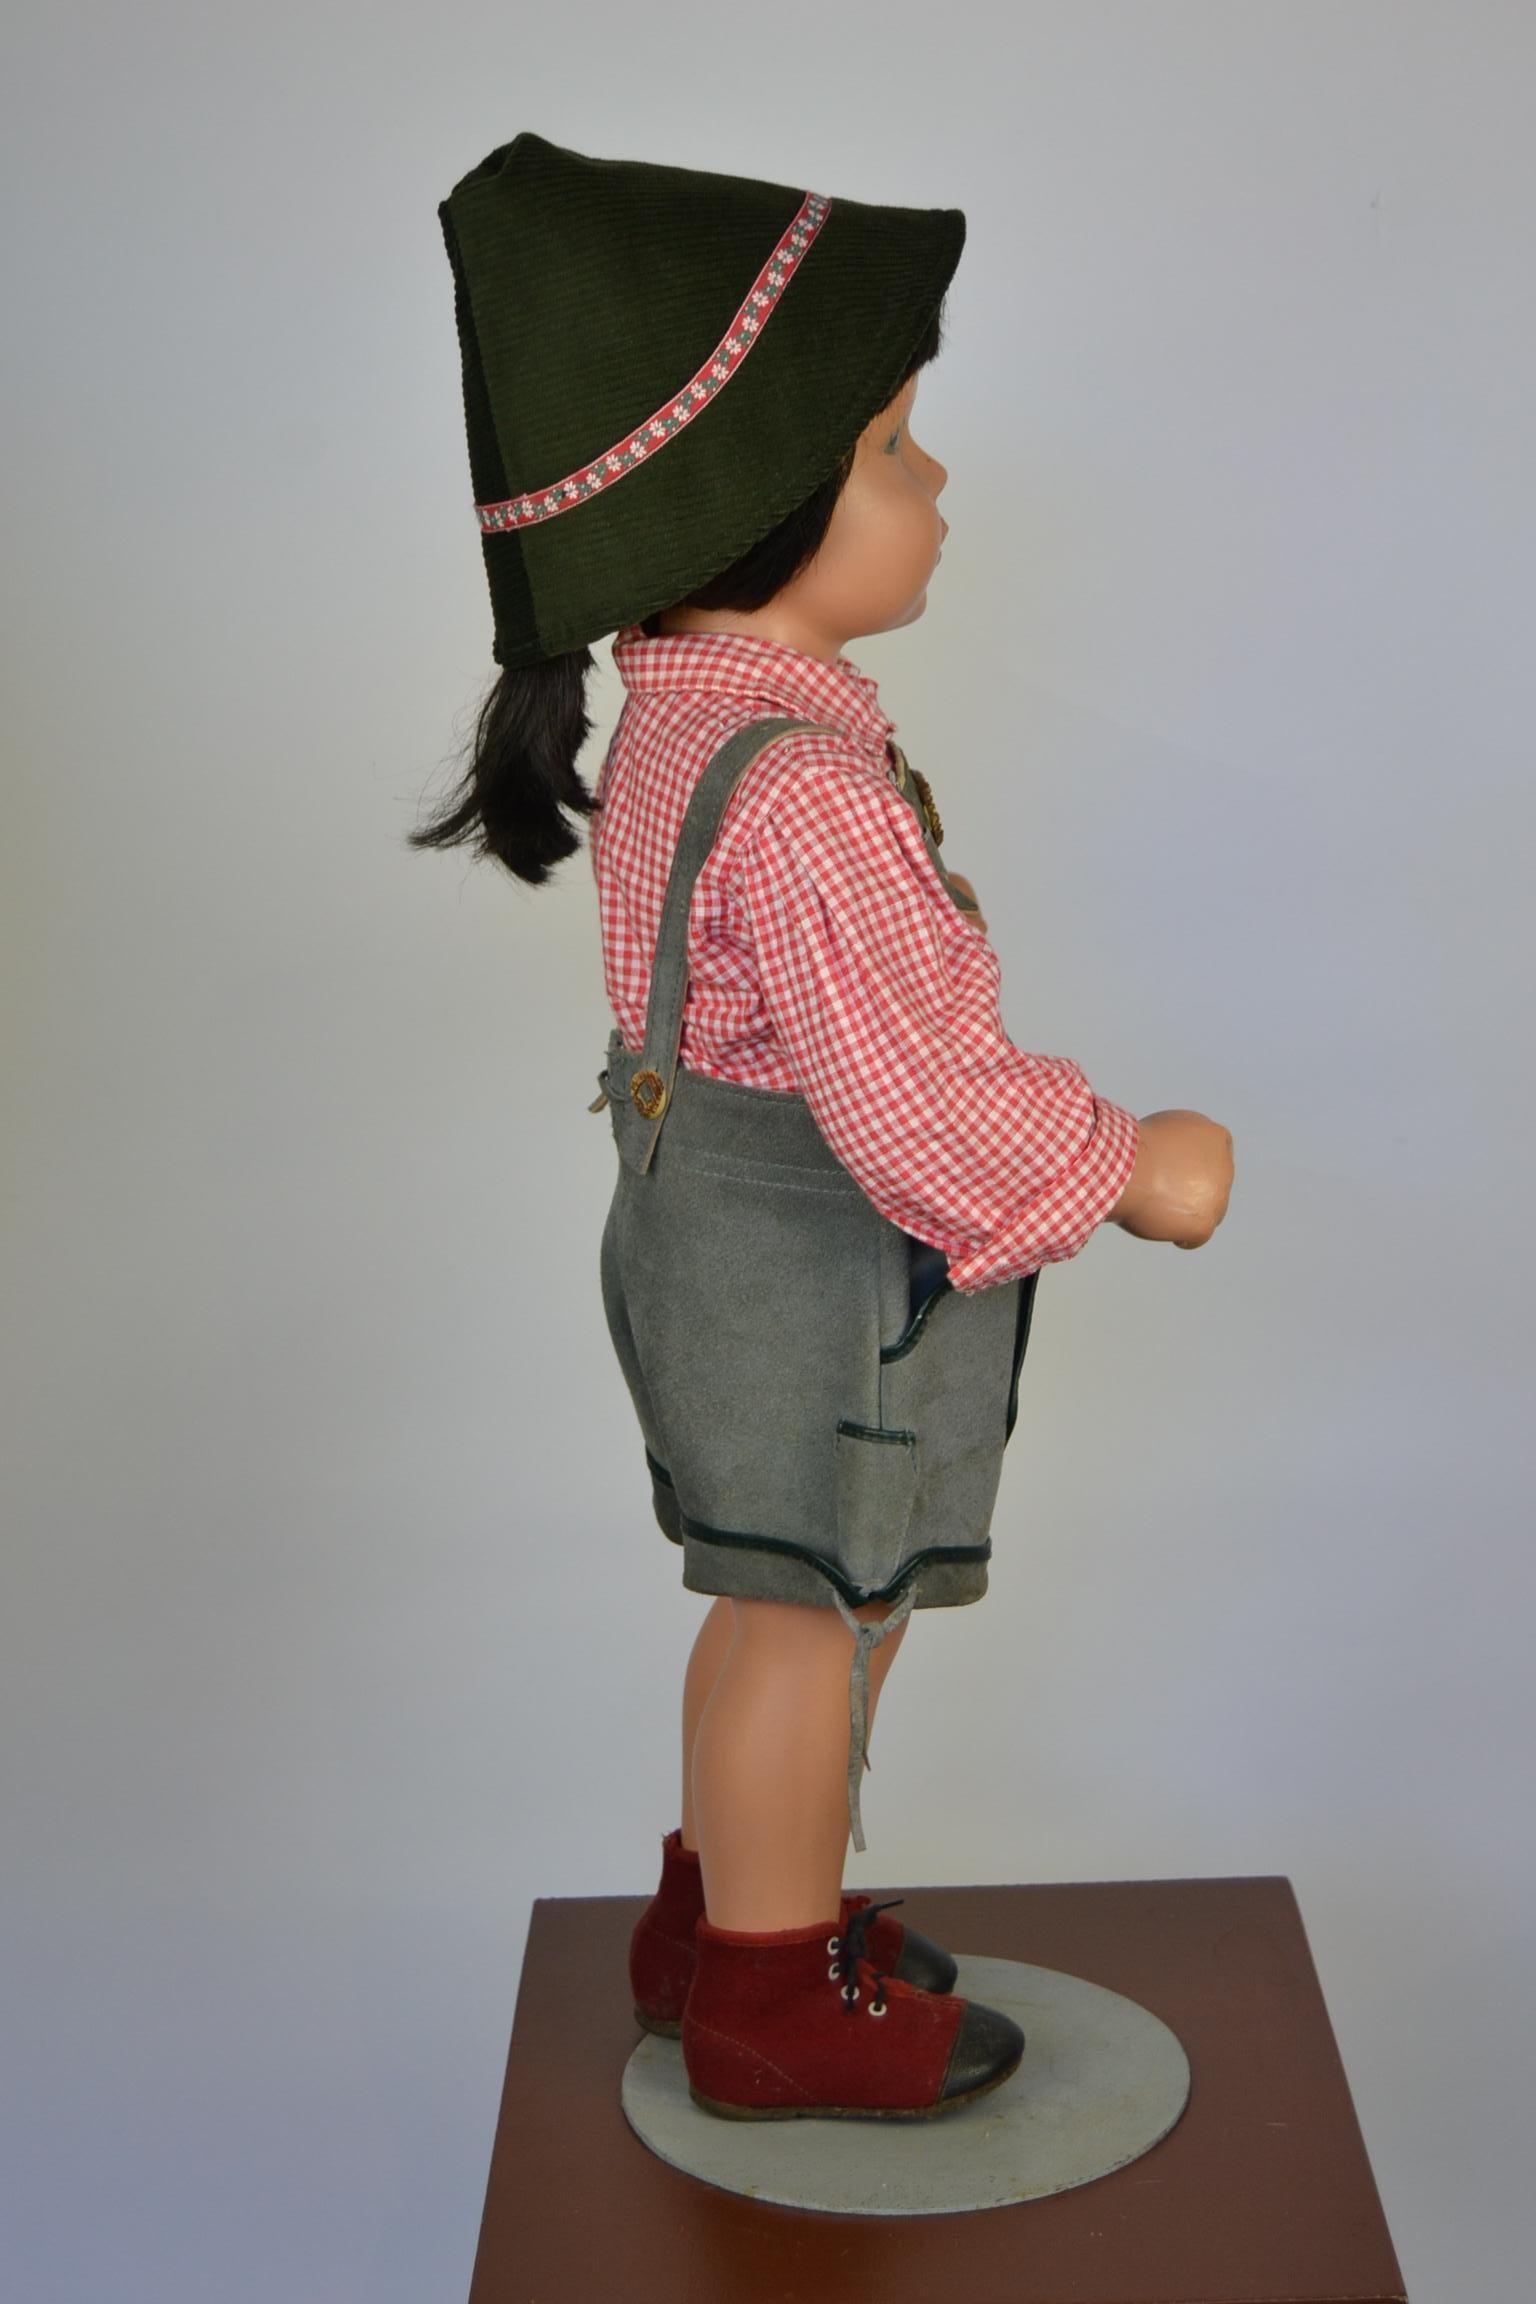 1950s Store Display Mannequin Child, Tyrol Clothing, Kathe Kruse Style 2